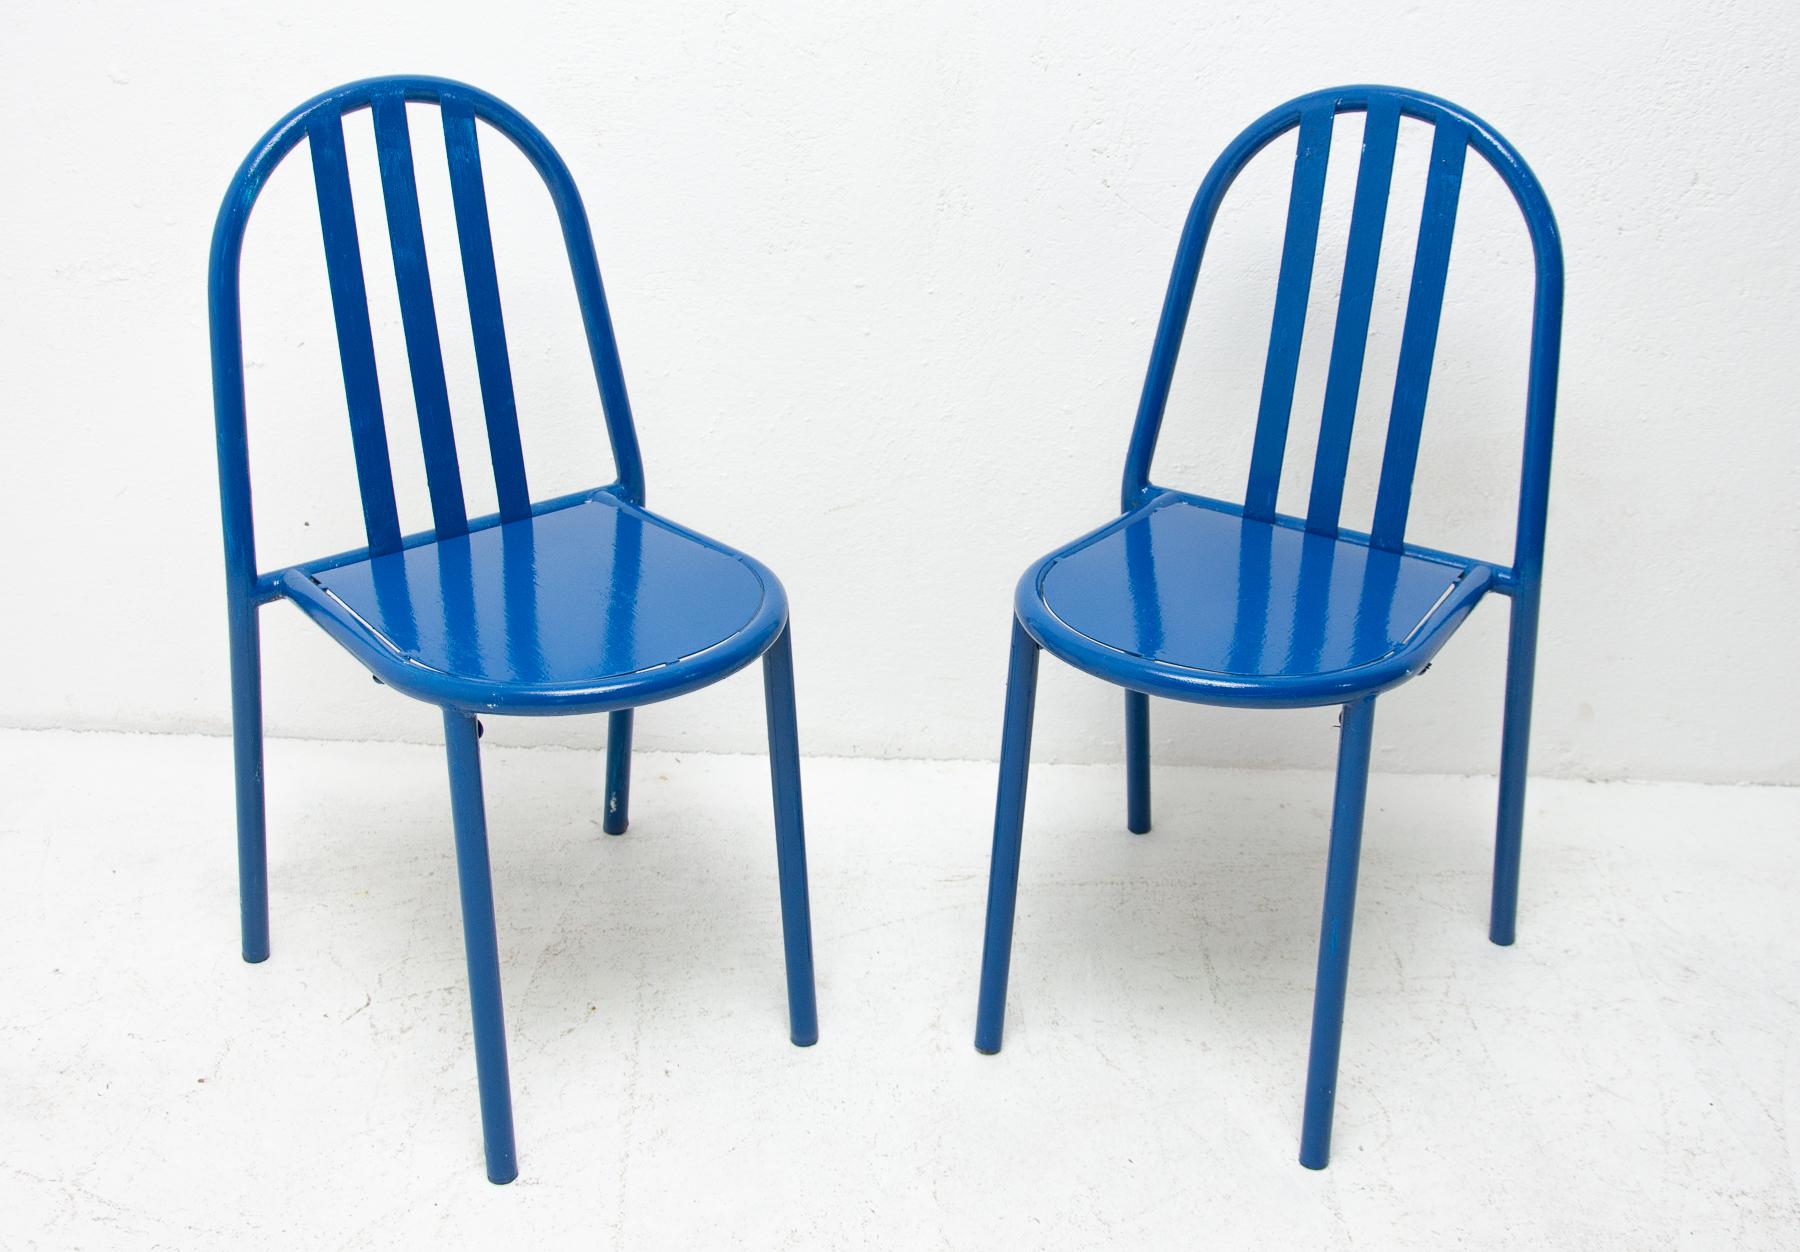 This chair was designed by French modernist architect Robert Mallet-Stevens, (1886-1945.)
It was first fabricated in France in 1928 by Ecart.
It´s made of lacquered tubular steel (the blue color is not original), a welded frames; rubber pads under